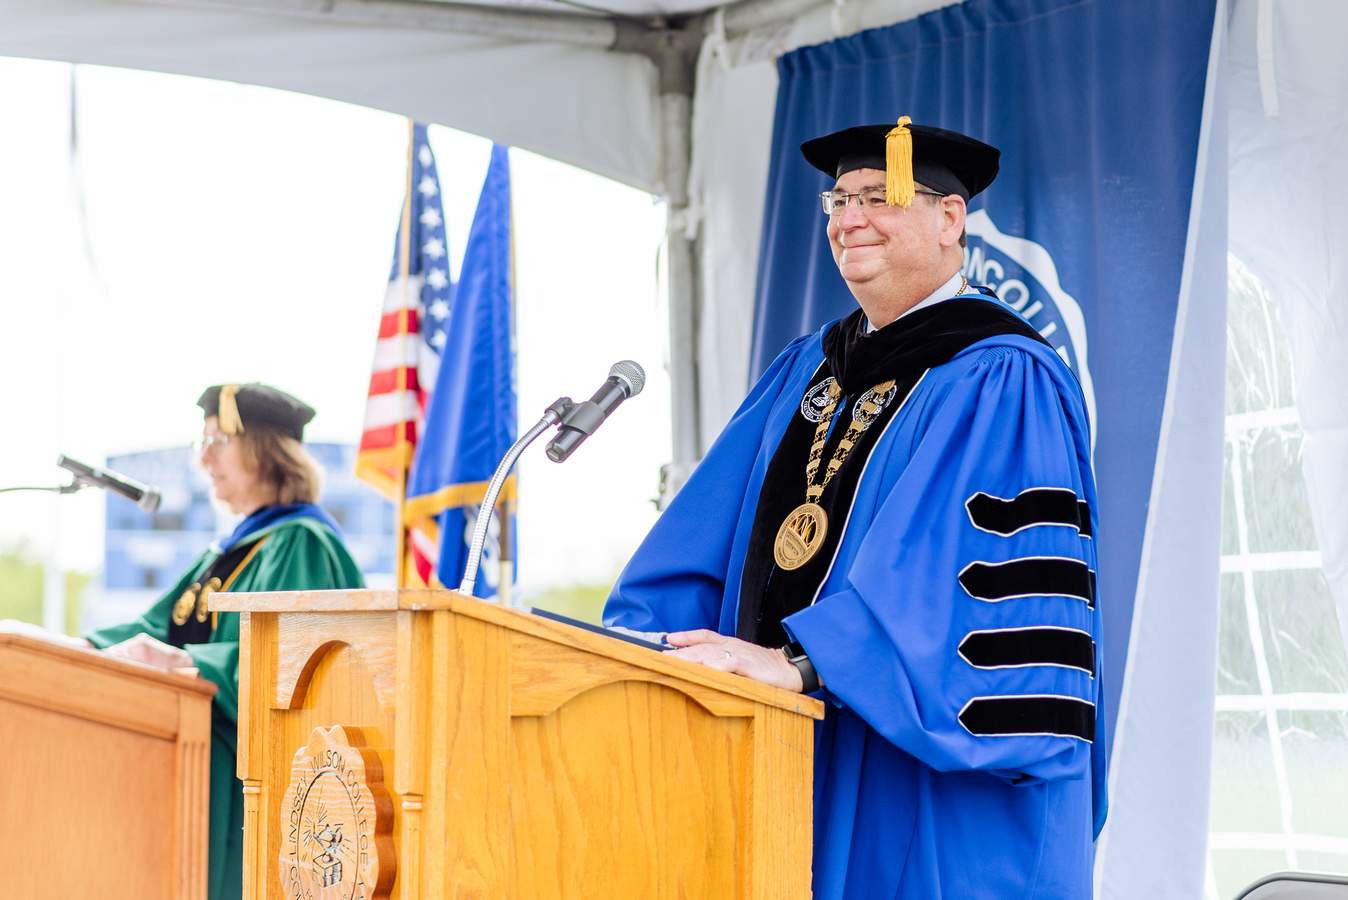 LWC to Hold 115th Commencement on Saturday, Largest Graduating Class in School History